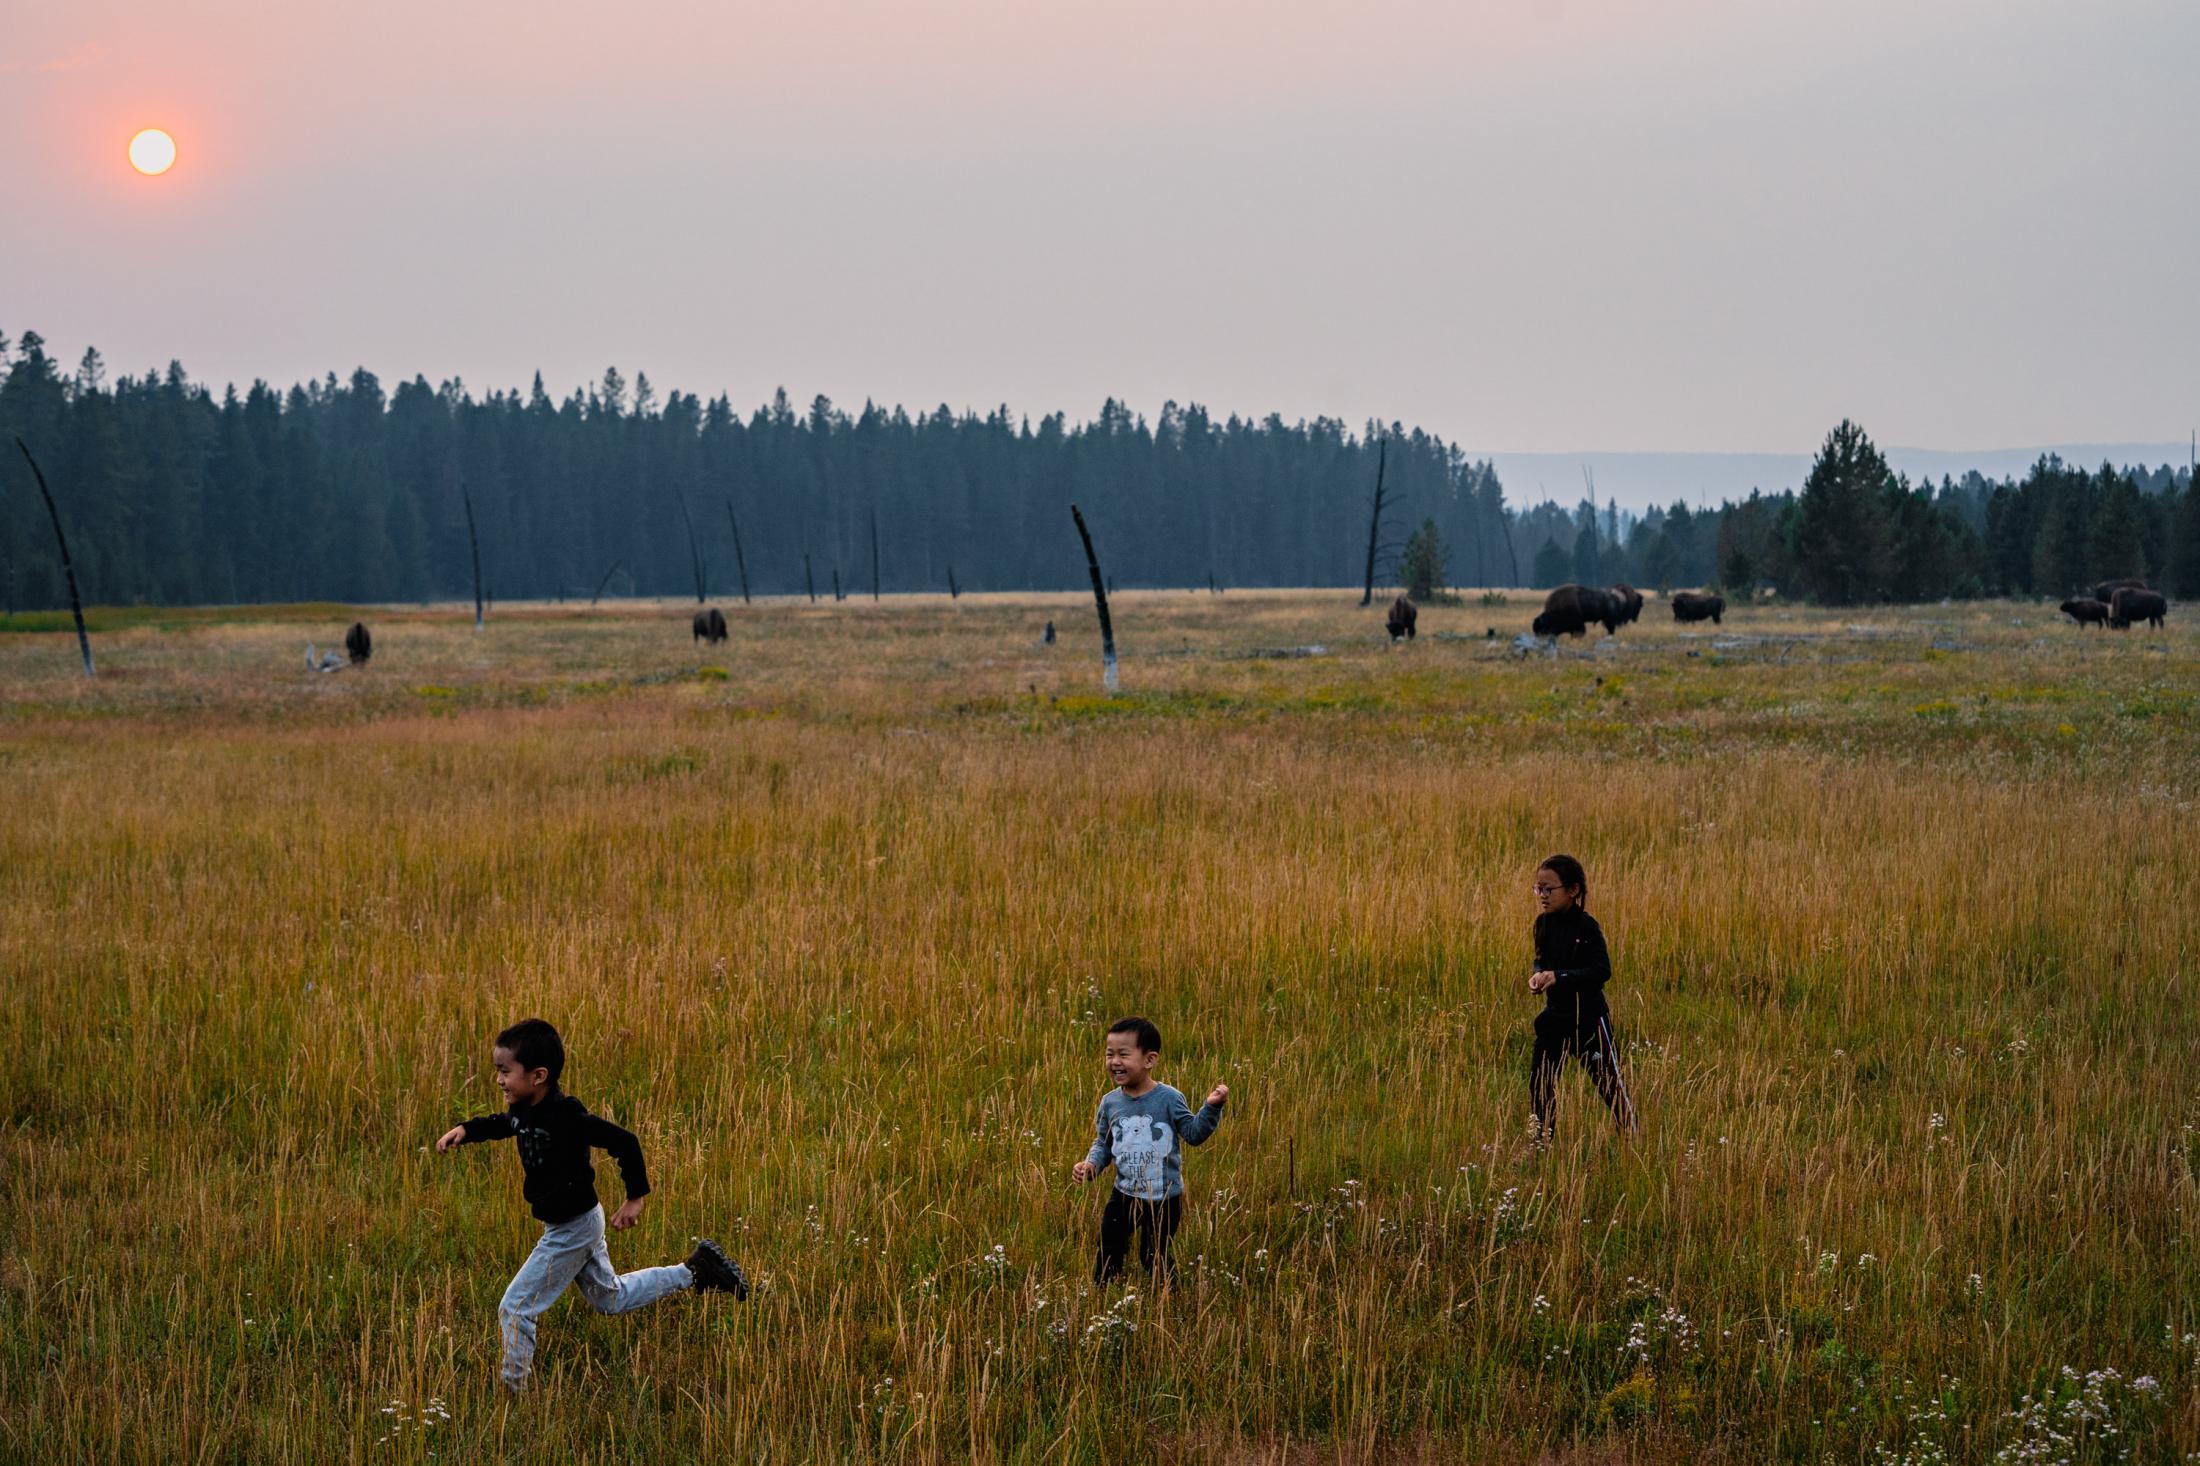 Bison, elk and social distance: A photographer’s view from Yellowstone during delta - Some children run around a group of bison around sunset.